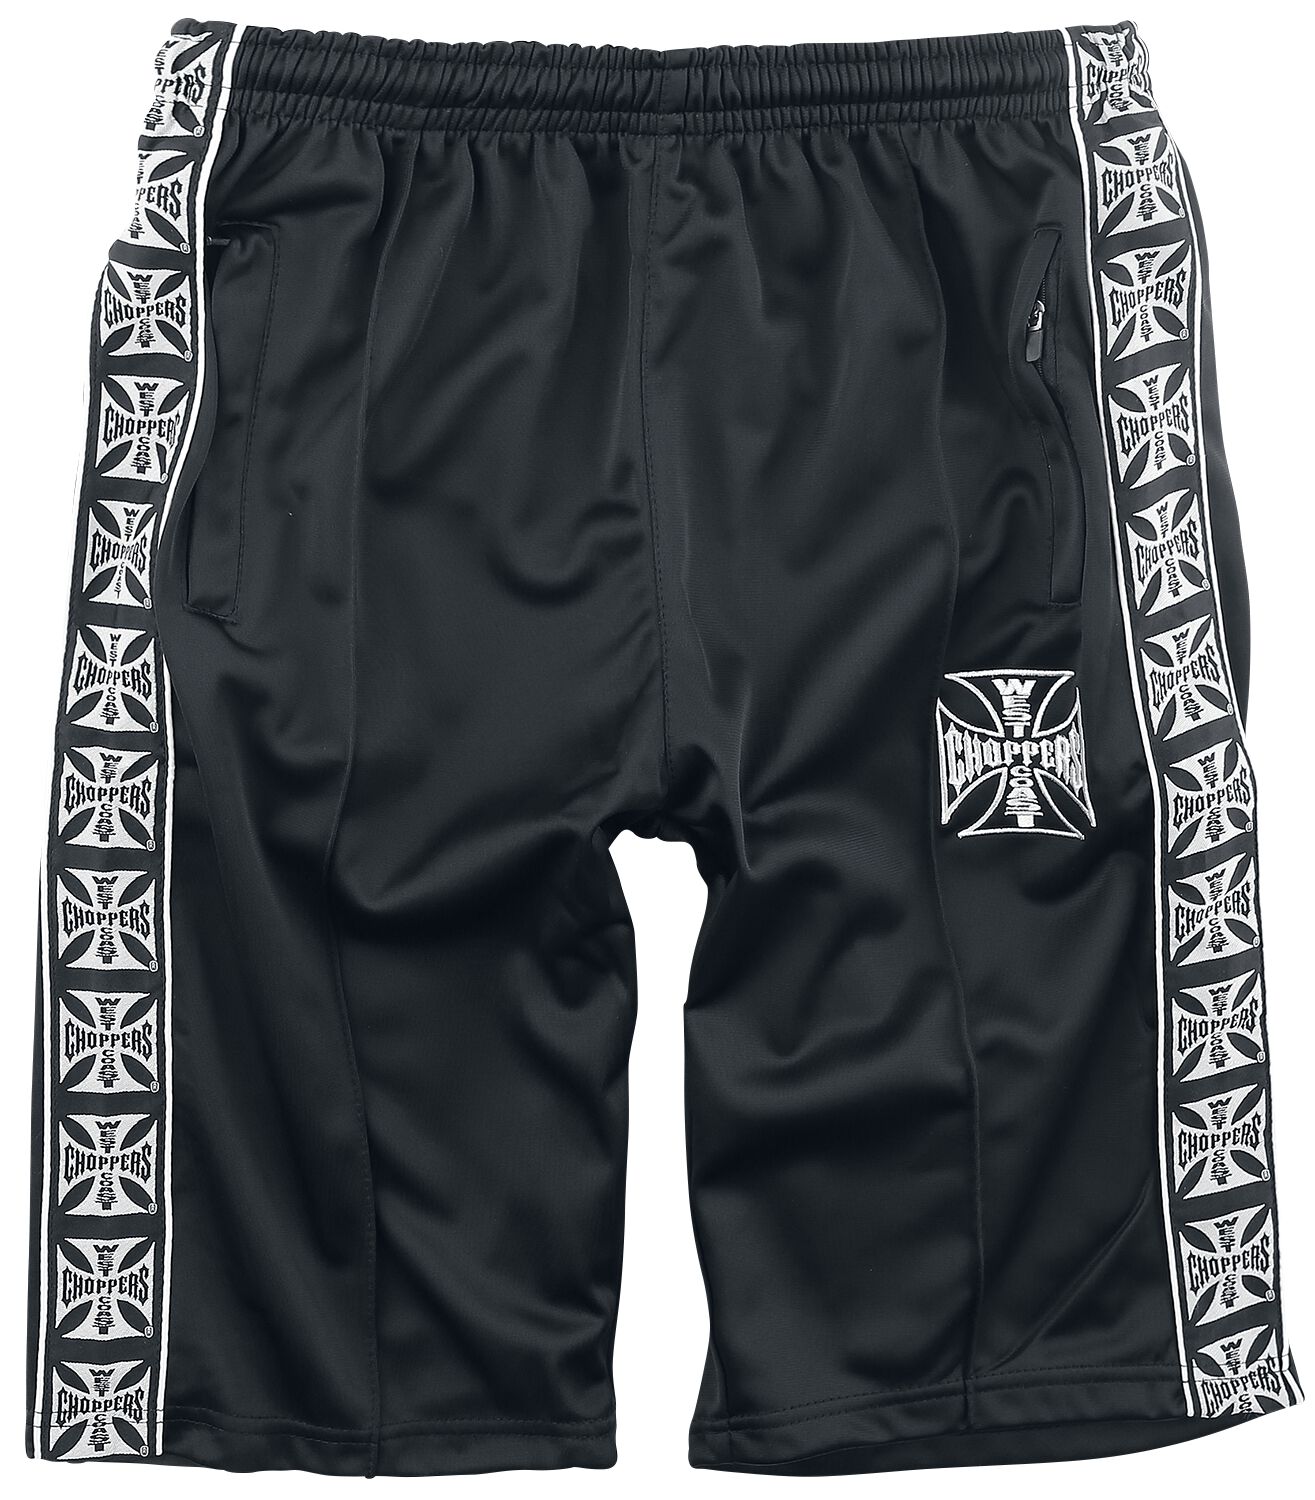 Image of Shorts Rockabilly di West Coast Choppers - Tracksuit Shorts - S a 4XL - Uomo - nero